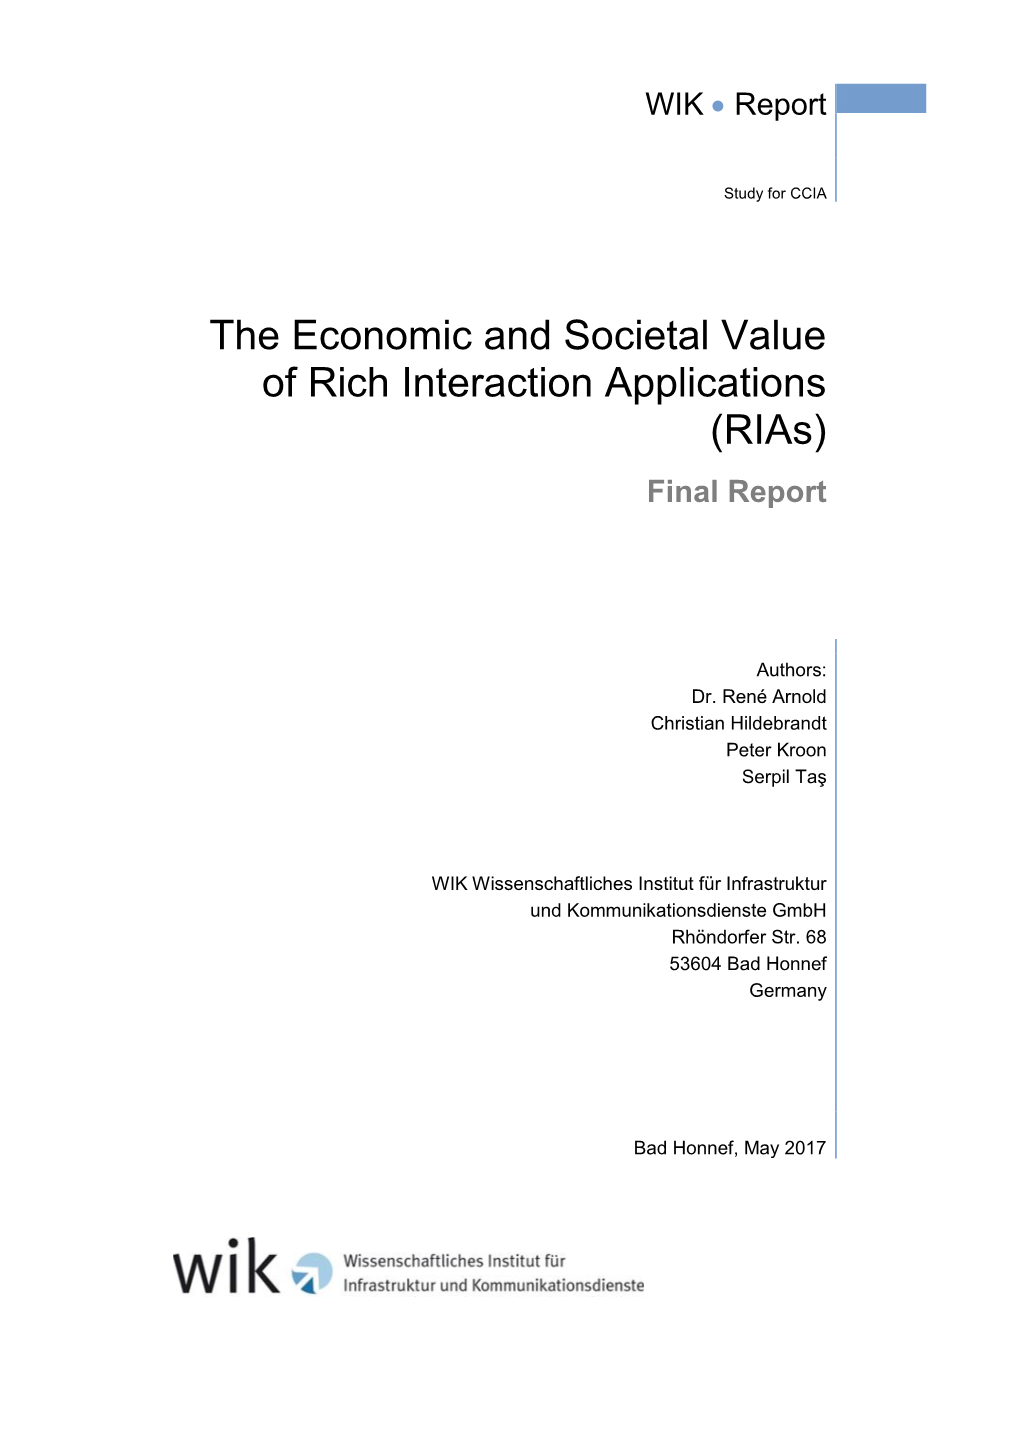 The Economic and Societal Value of Rich Interaction Applications (Rias) Final Report